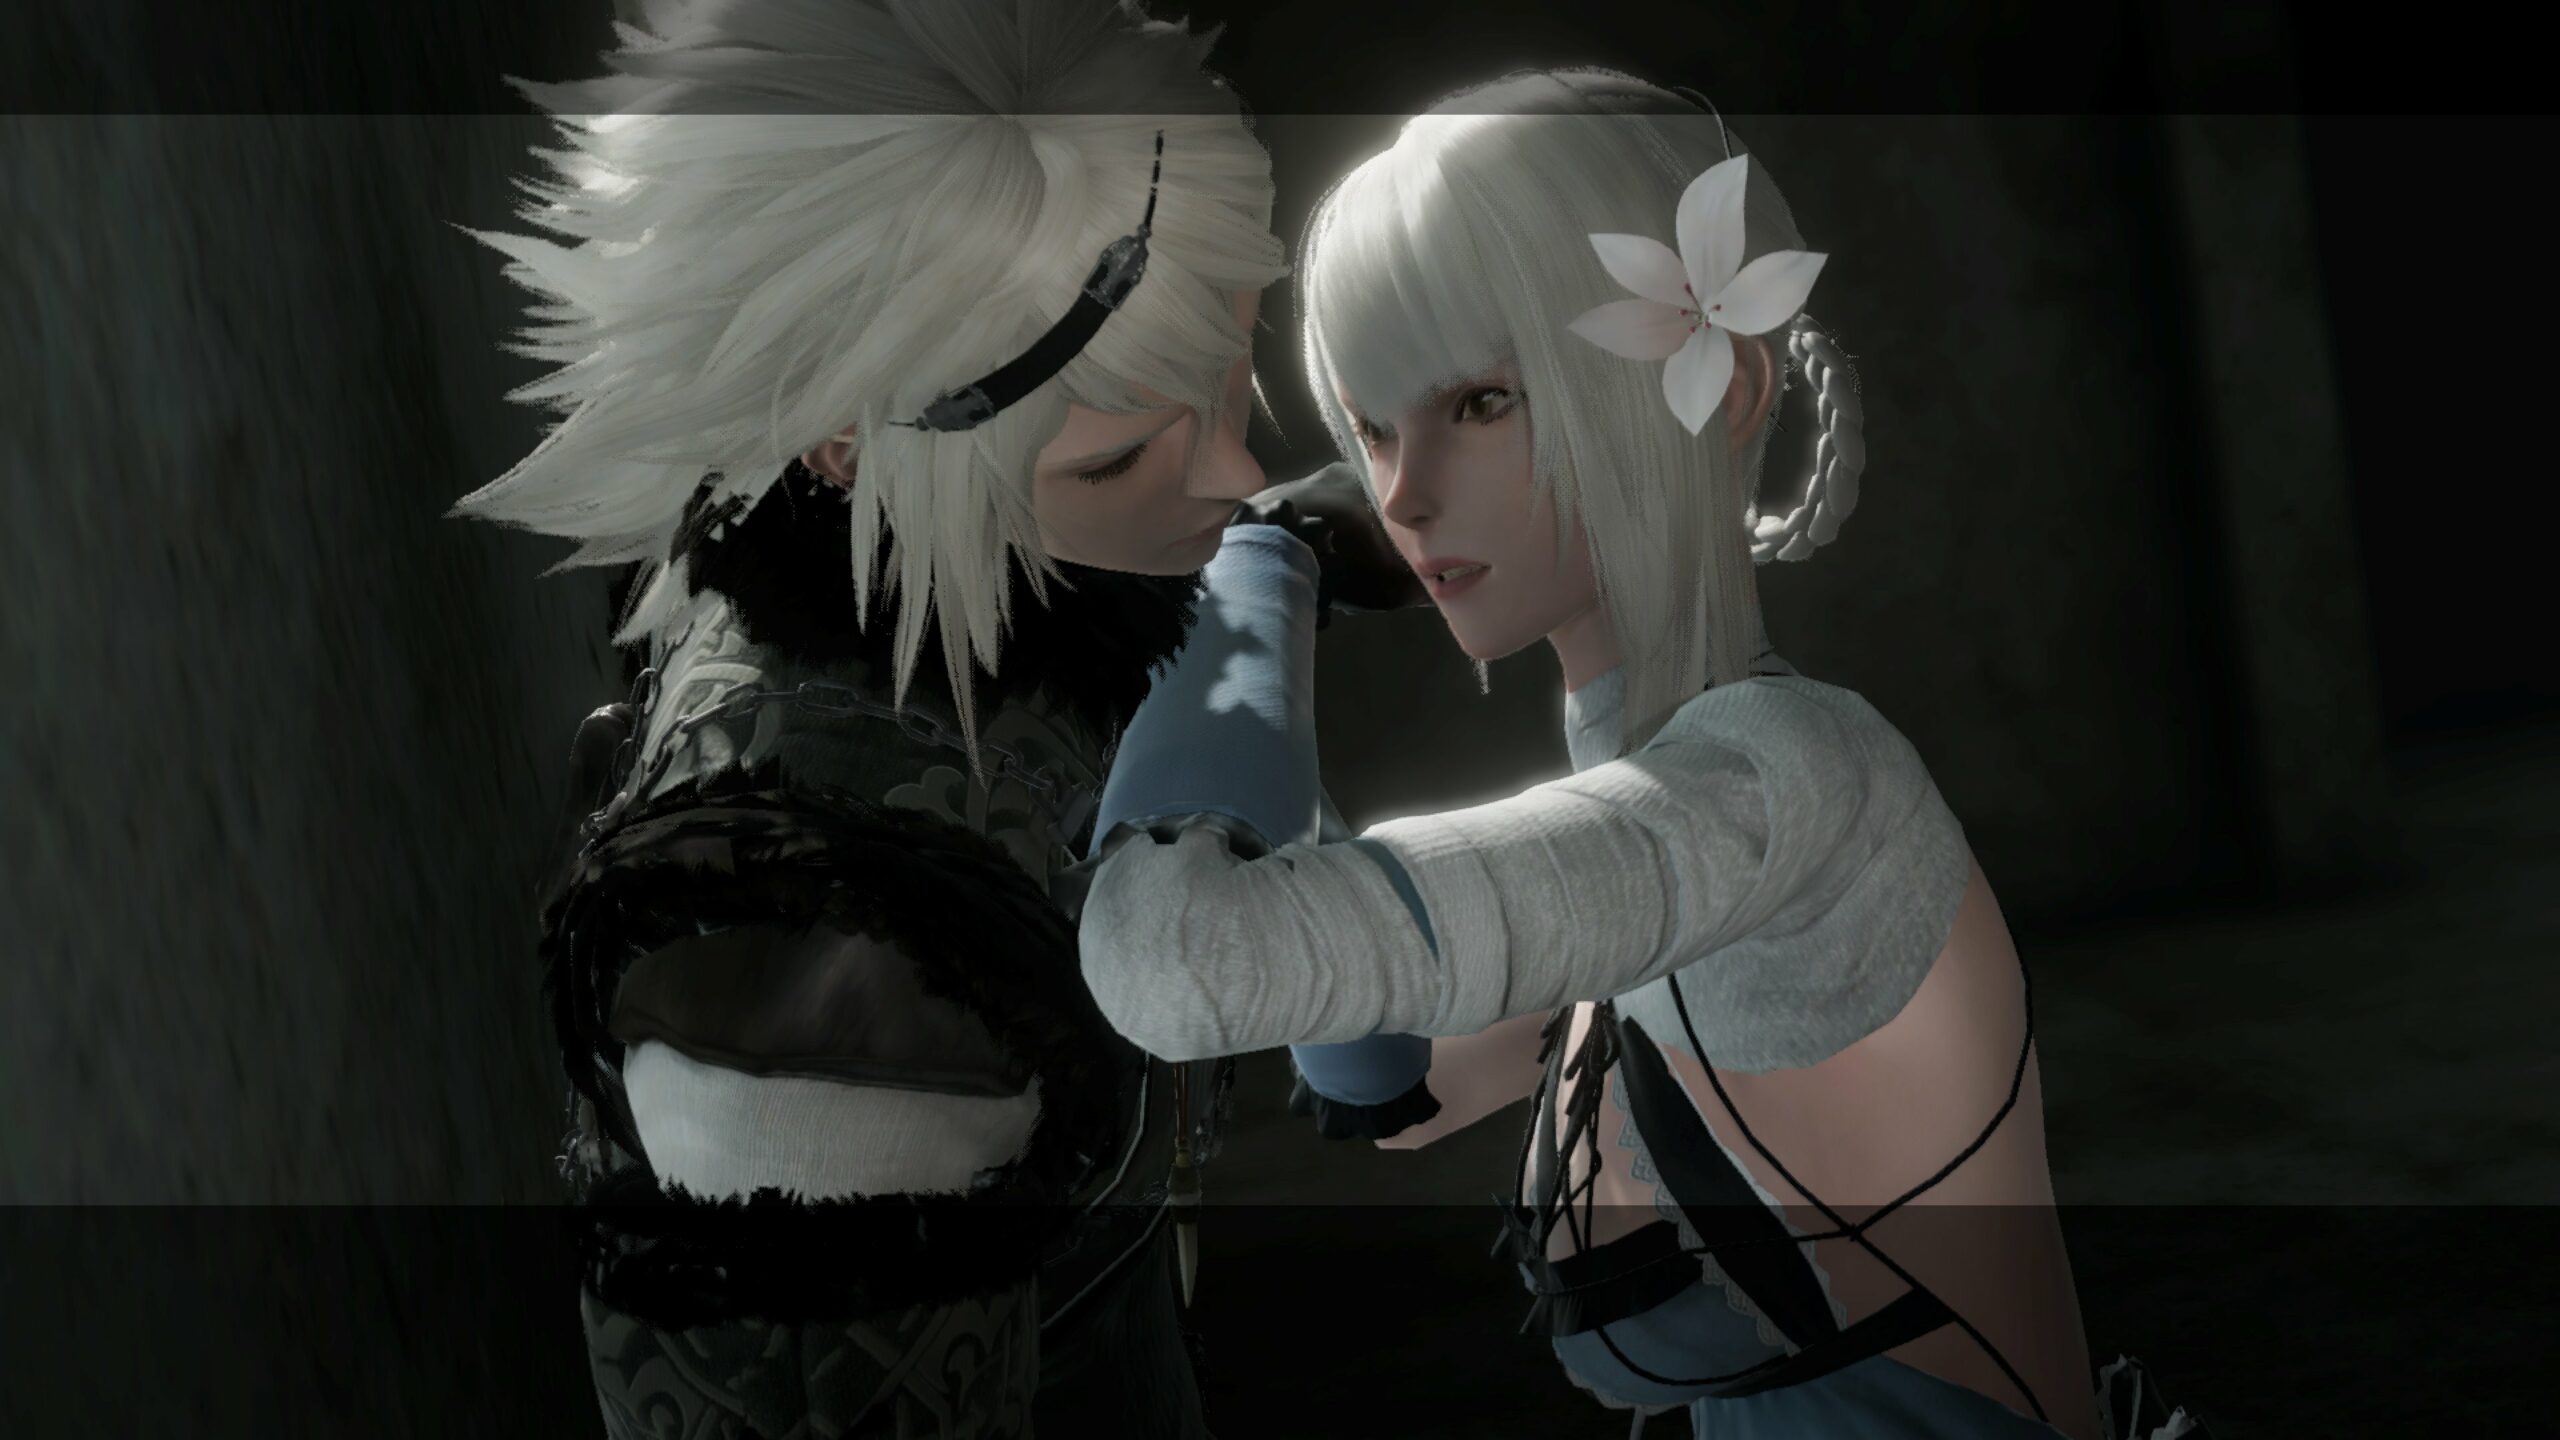 Nier Replicant datamine 'uncovers Nintendo Switch references' | VGC